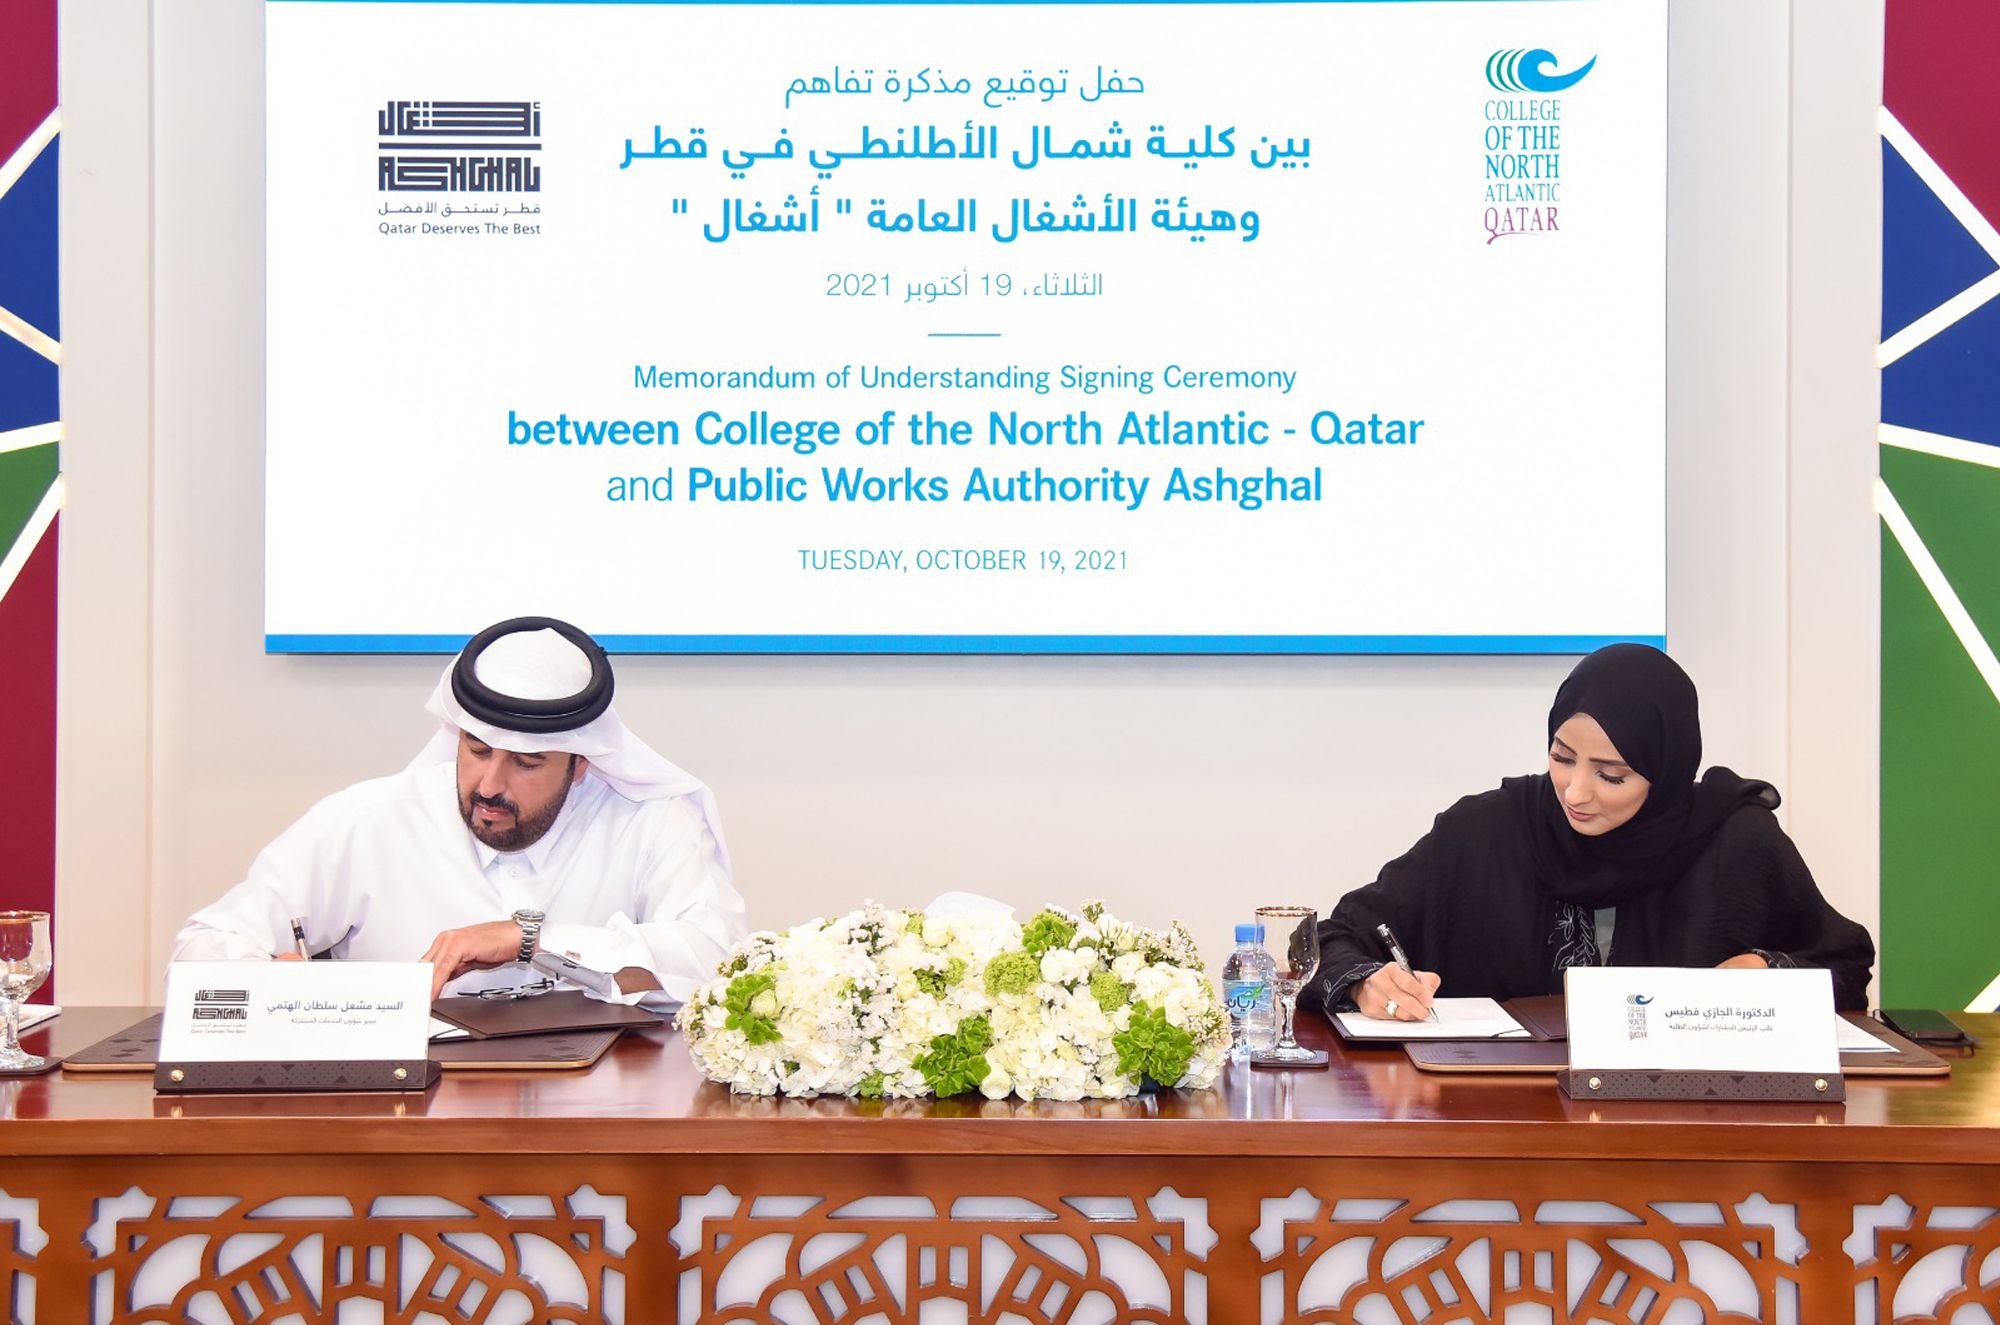 CNA-Q, Ashghal Sign MoU to Develop Education, Vocational Initiatives